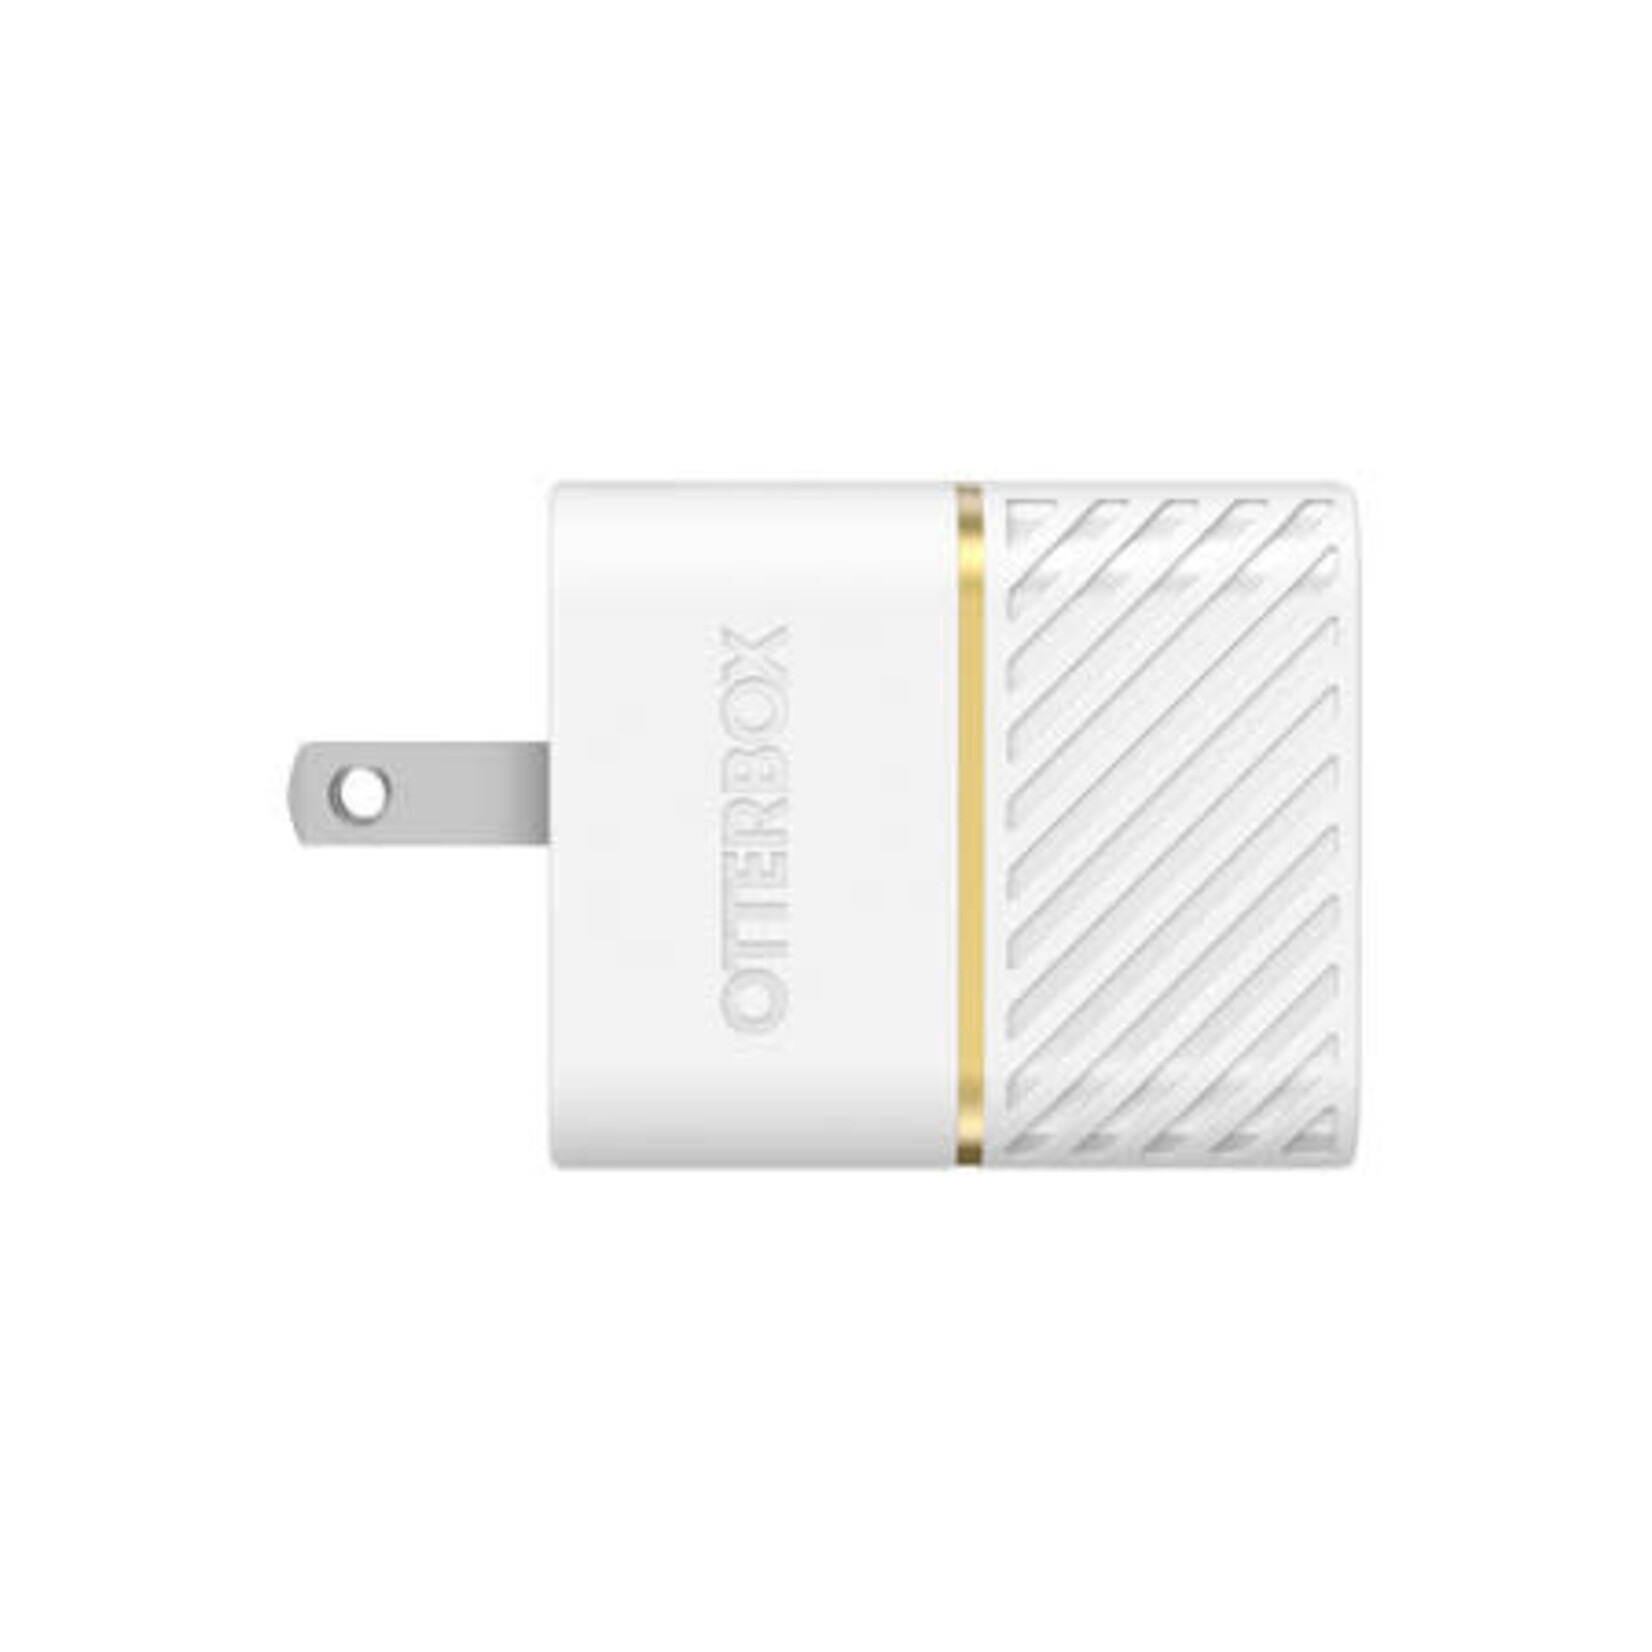 Chargeur Mural 20W Blanc - OTTERBOX